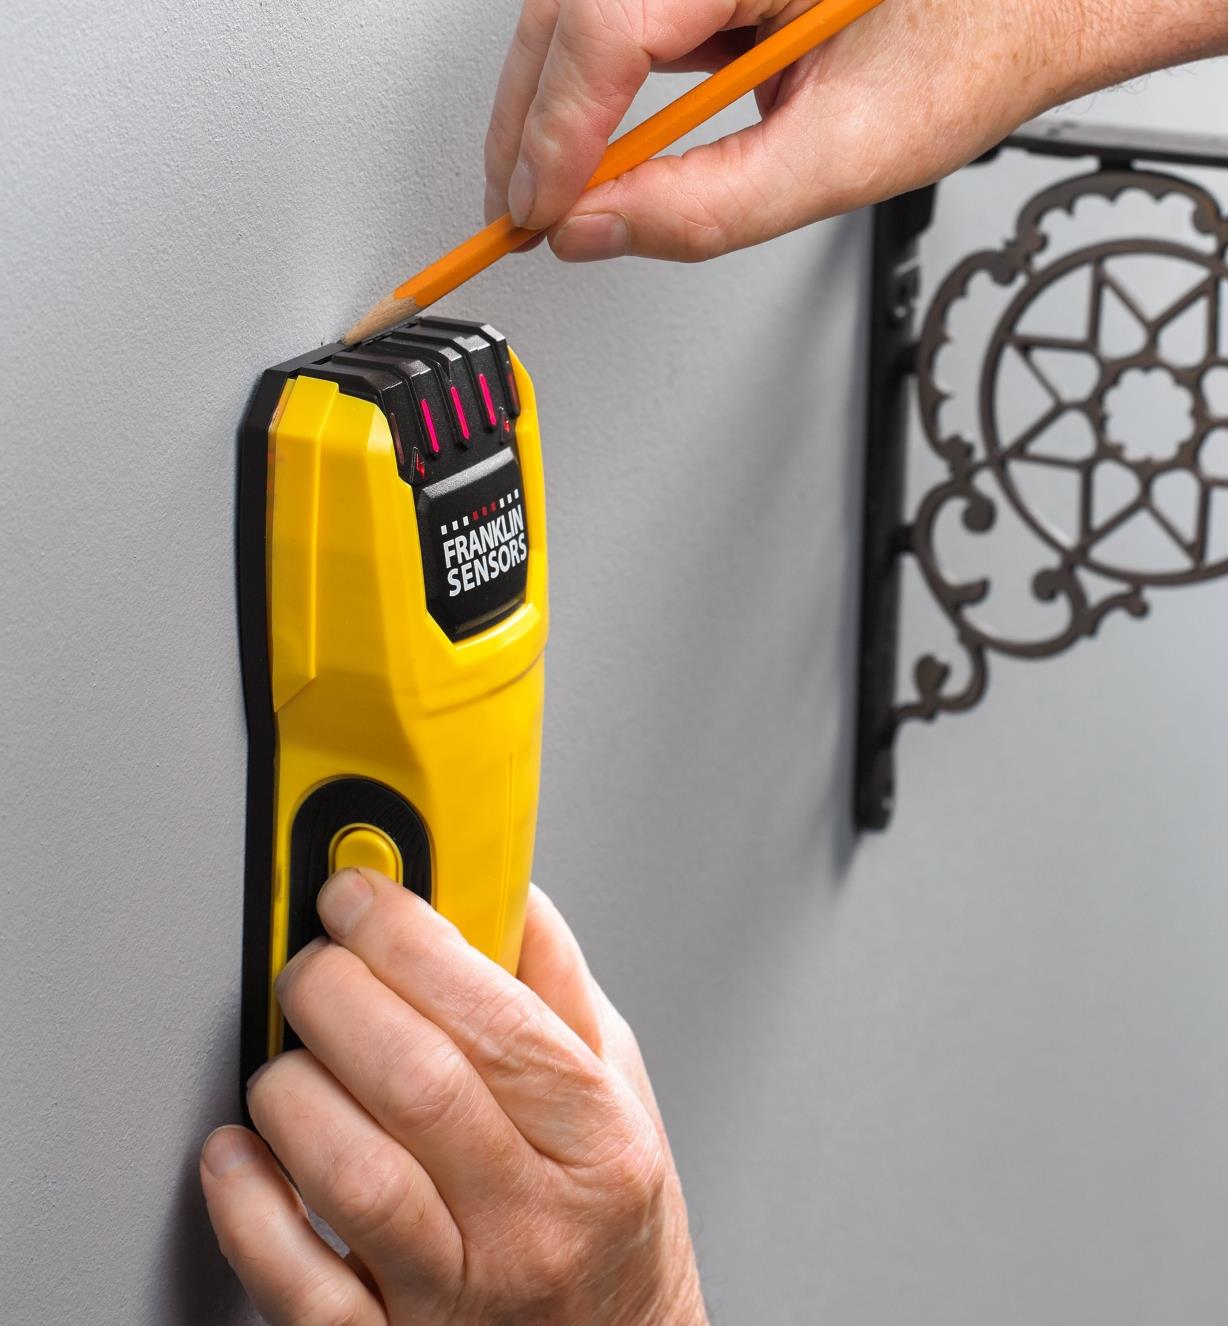 Using the Franklin M50 stud detector to locate studs for installing a wall shelf in the home